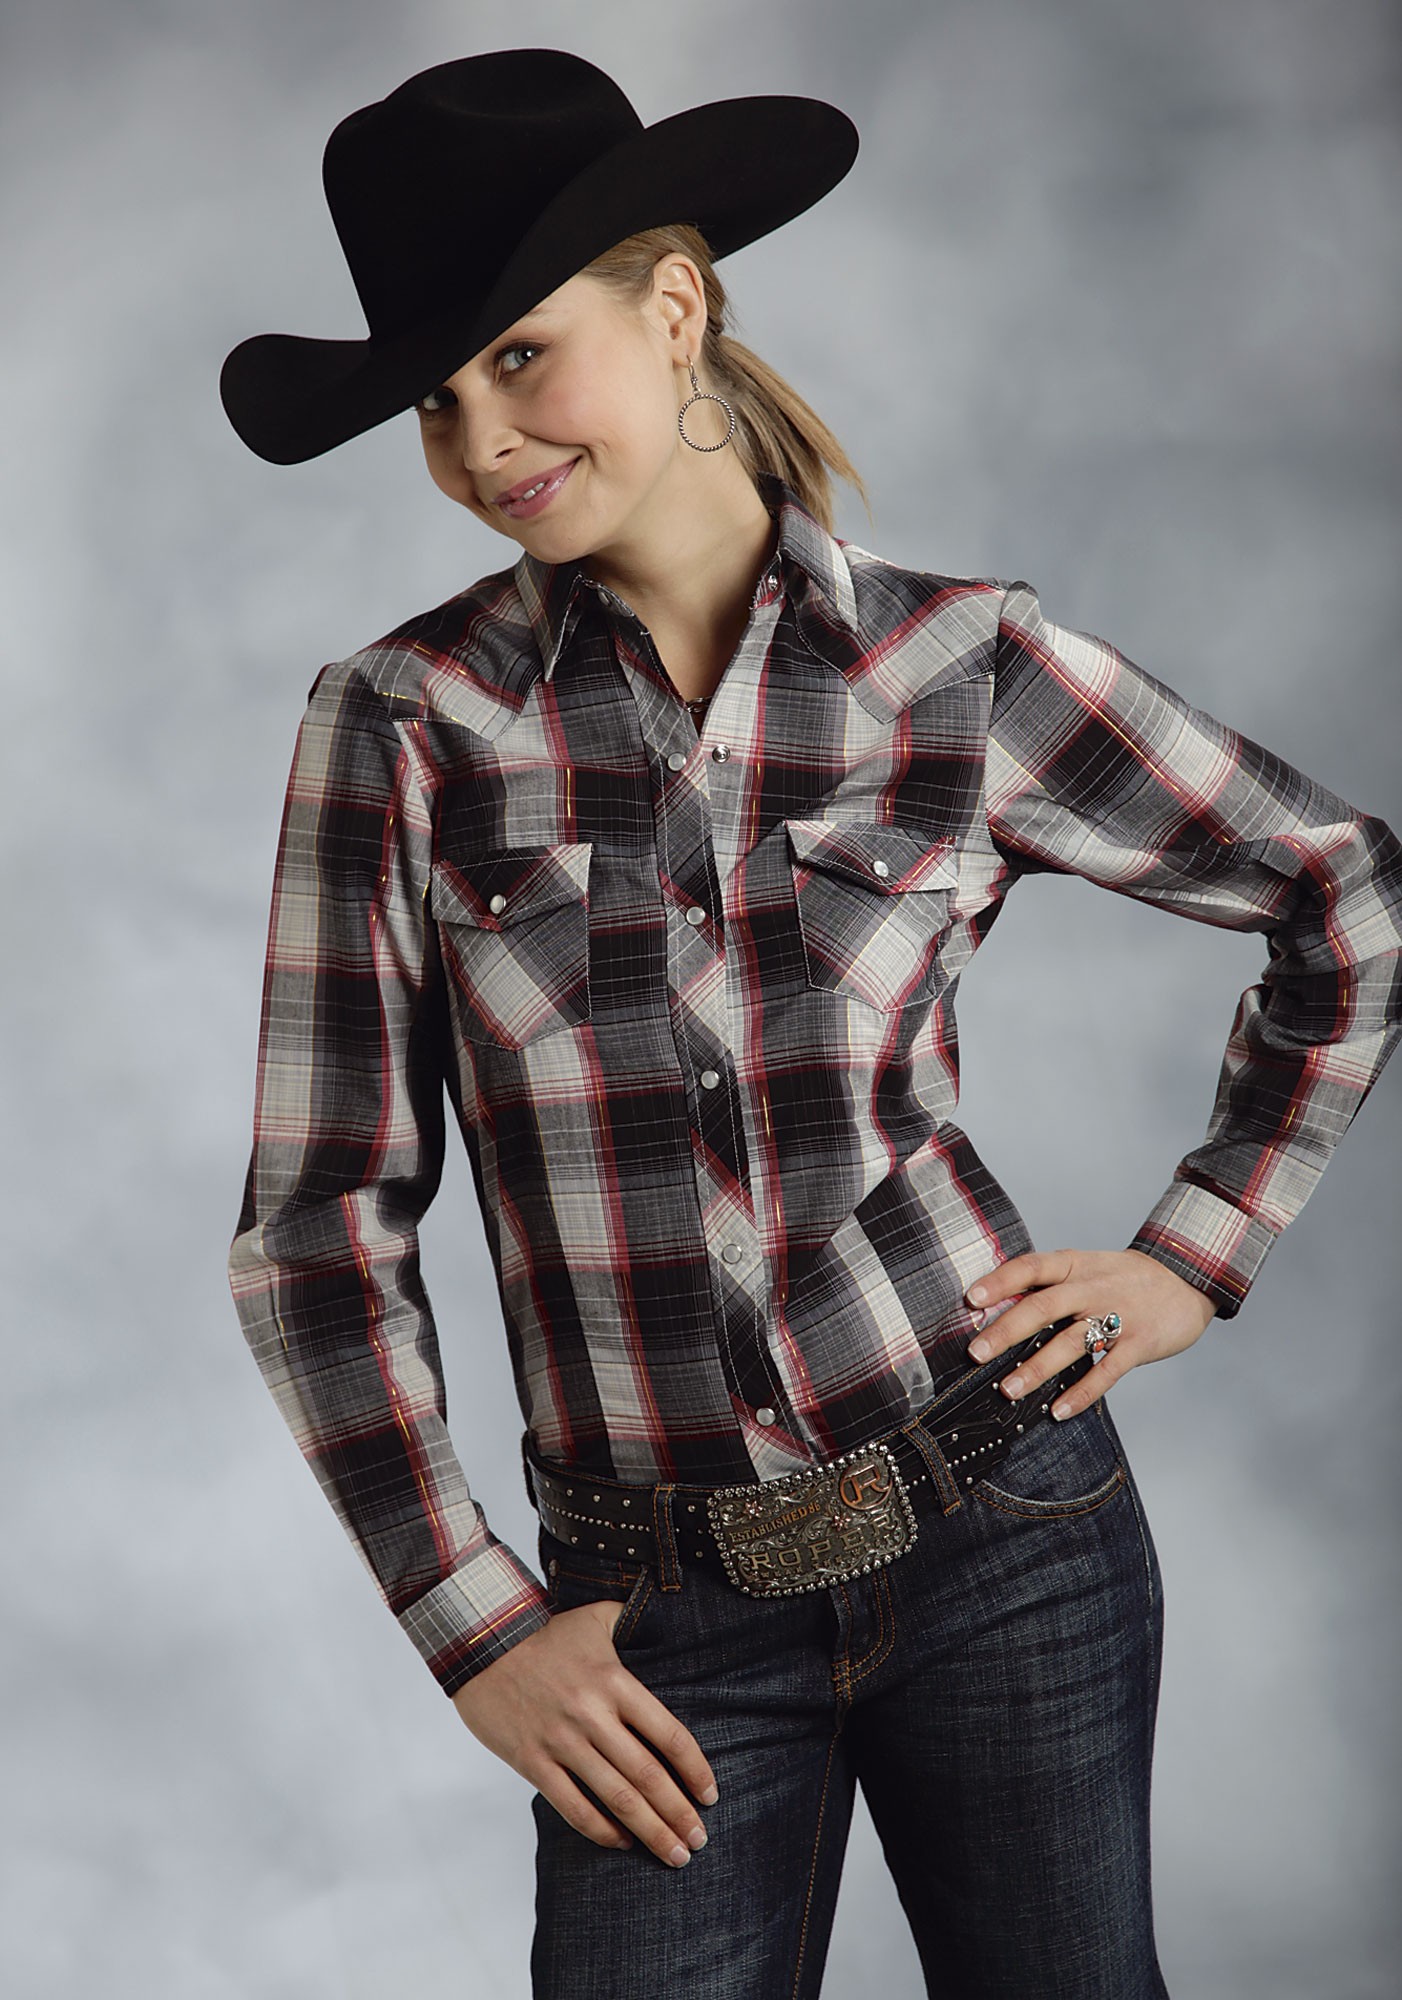 1402x2000 > Cowgirl Wallpapers